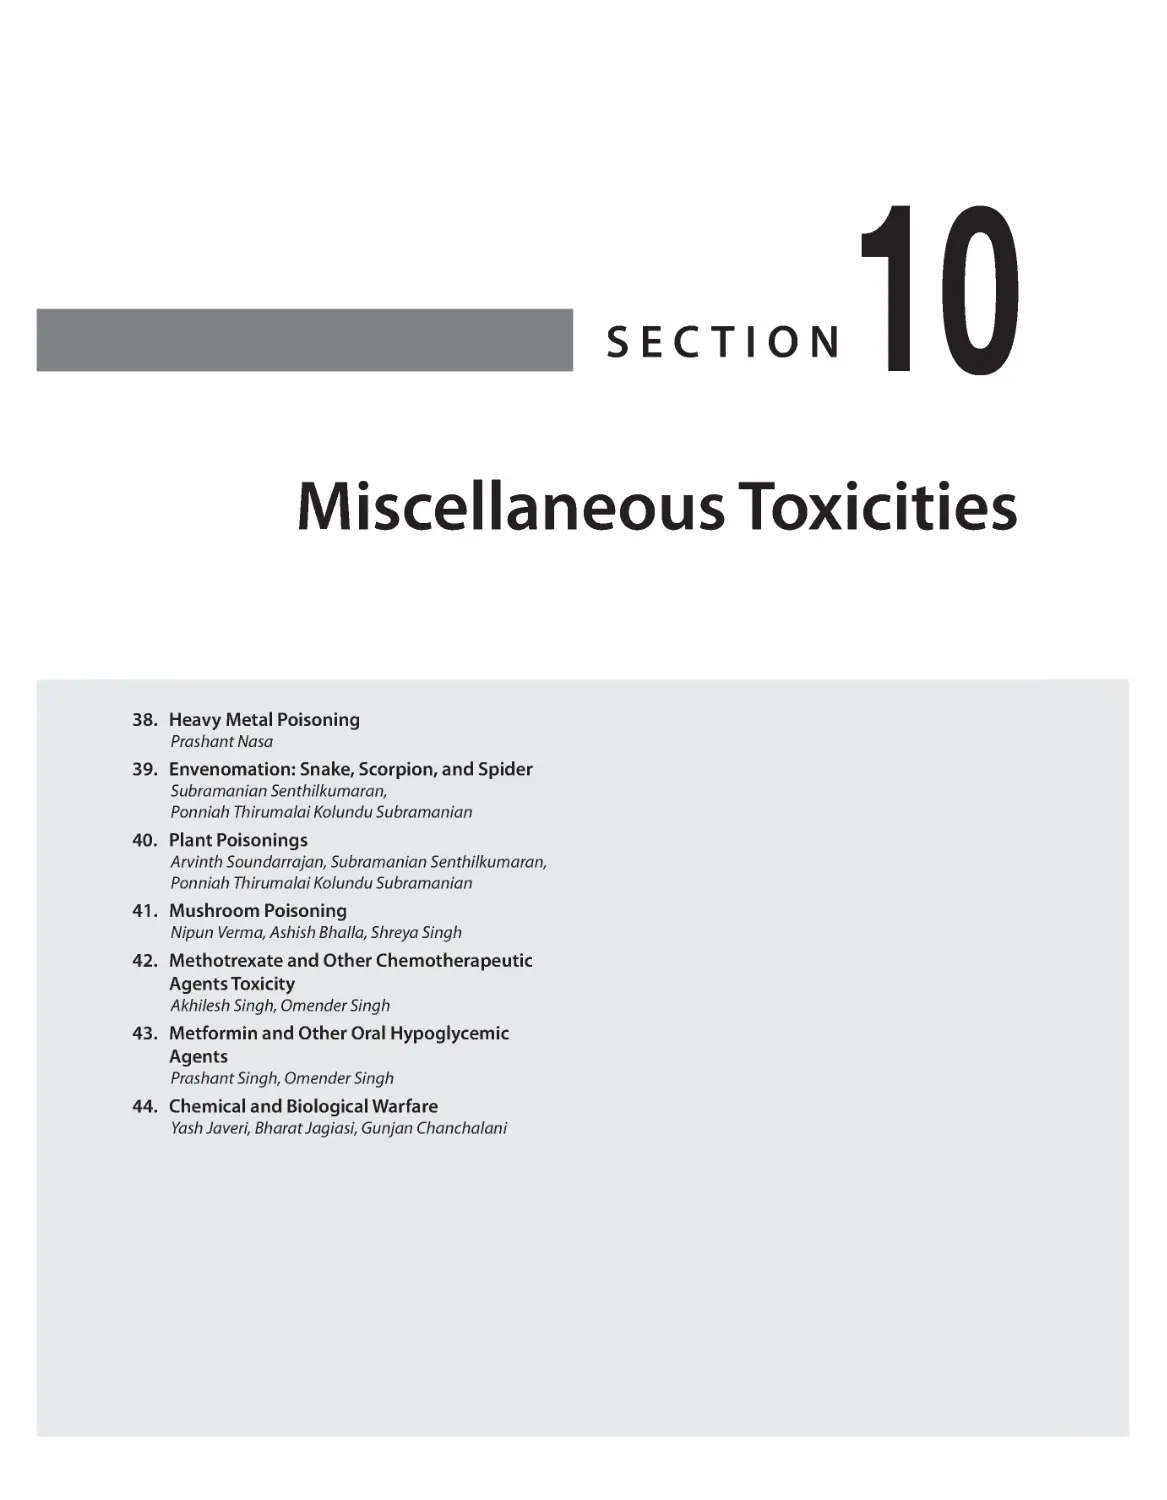 SECTION 10: Miscellaneous Toxicities